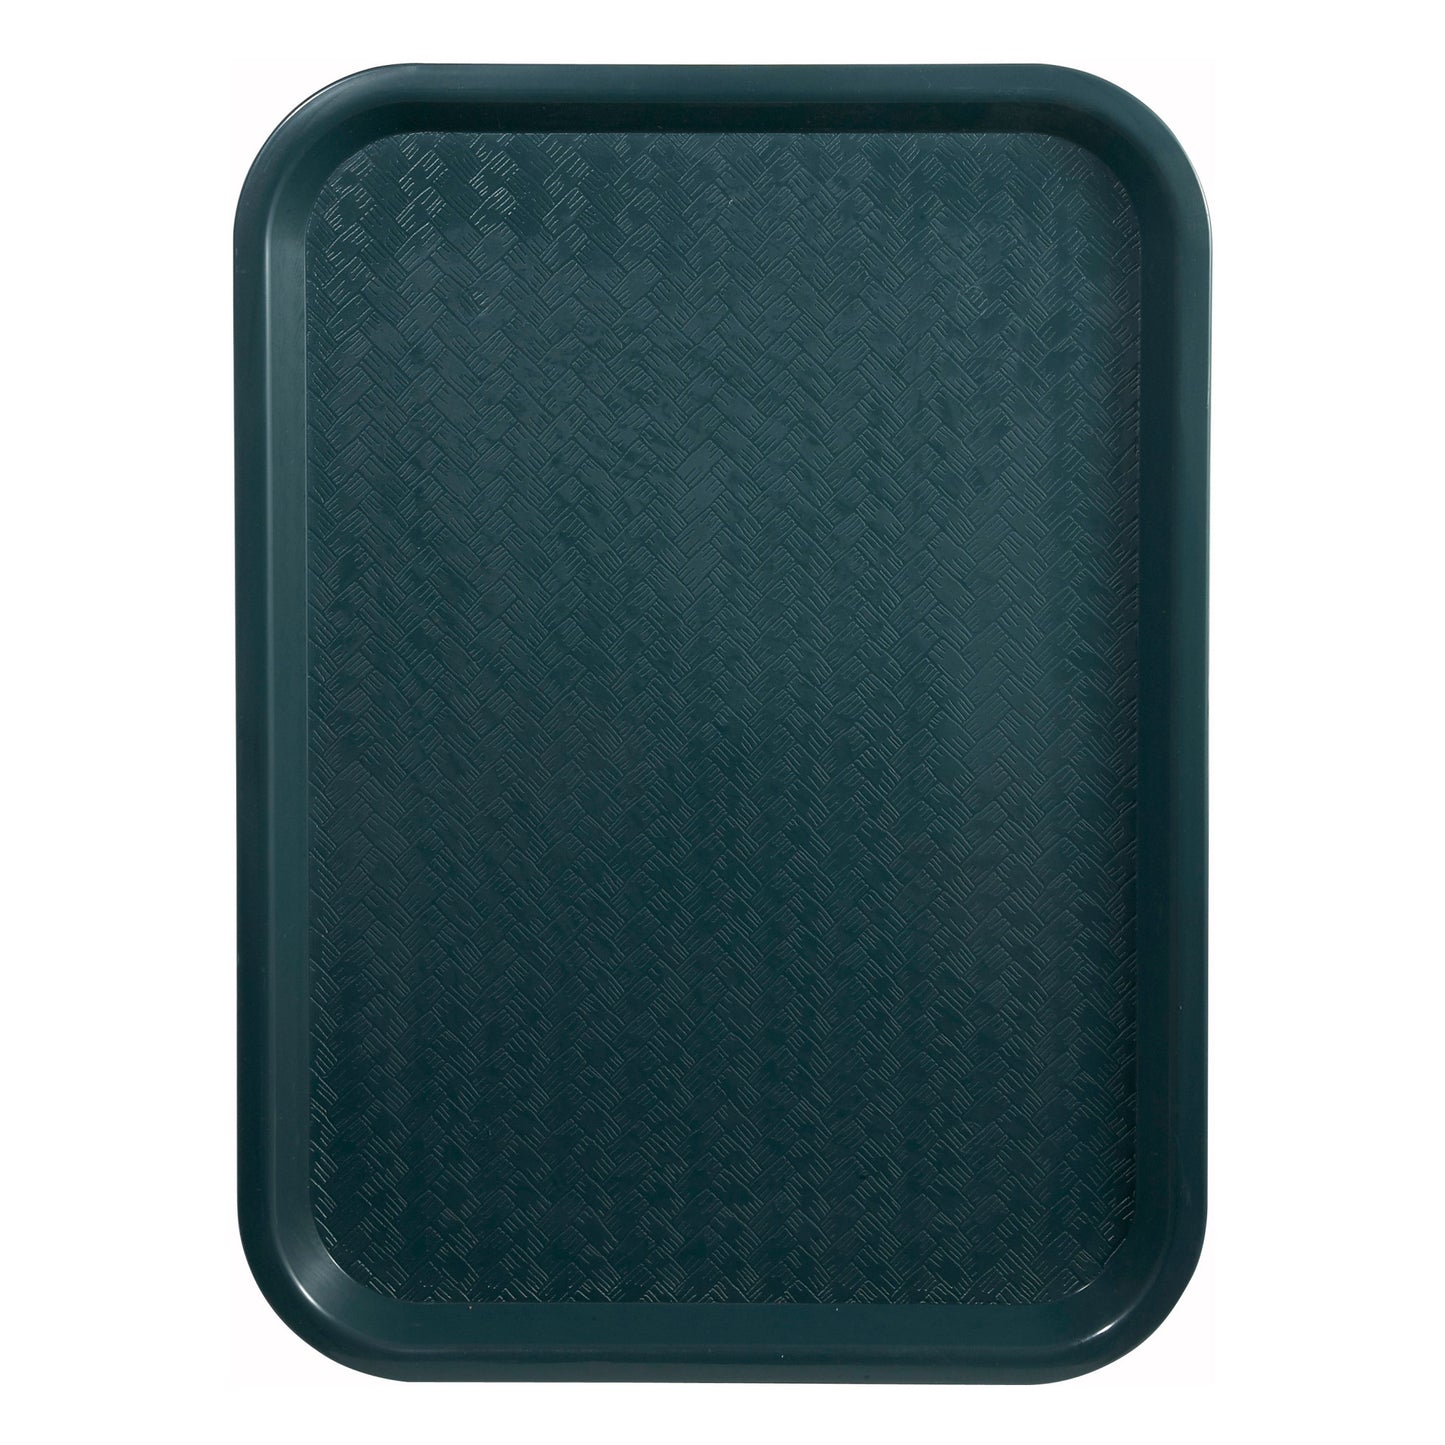 FFT-1014G - High Quality Plastic Cafeteria Tray - 10" x 14", Green